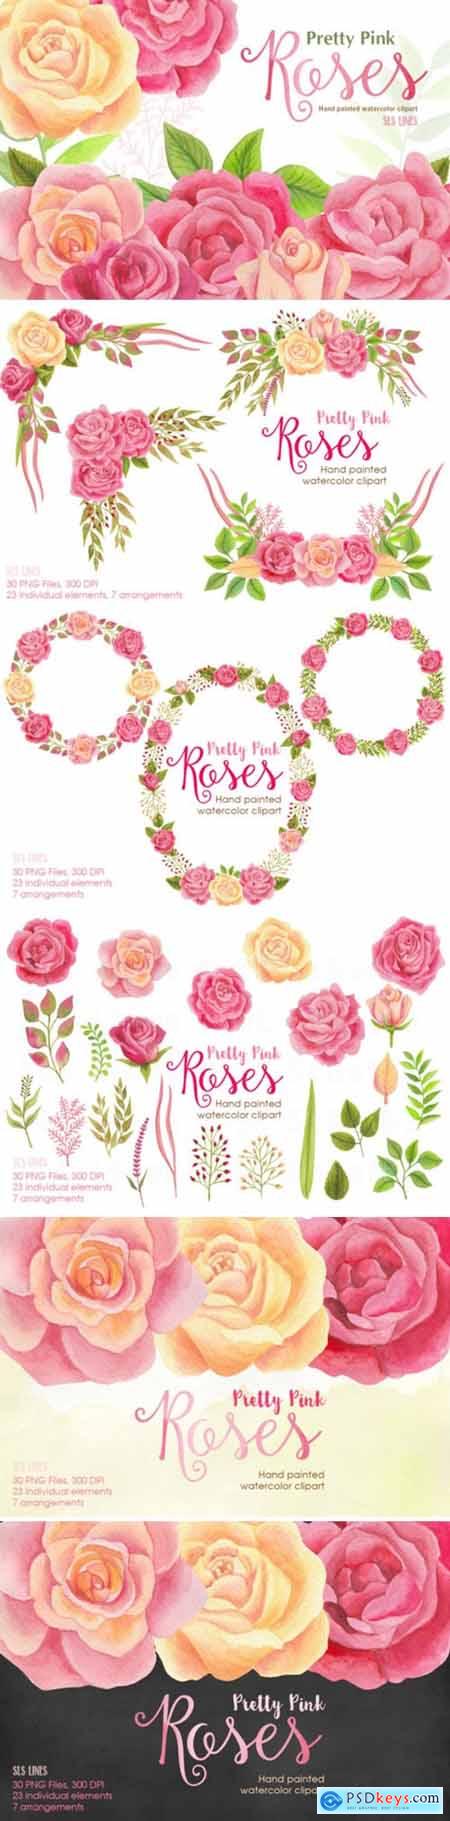 Pretty Pink Roses Watercolor Clipart 1686929